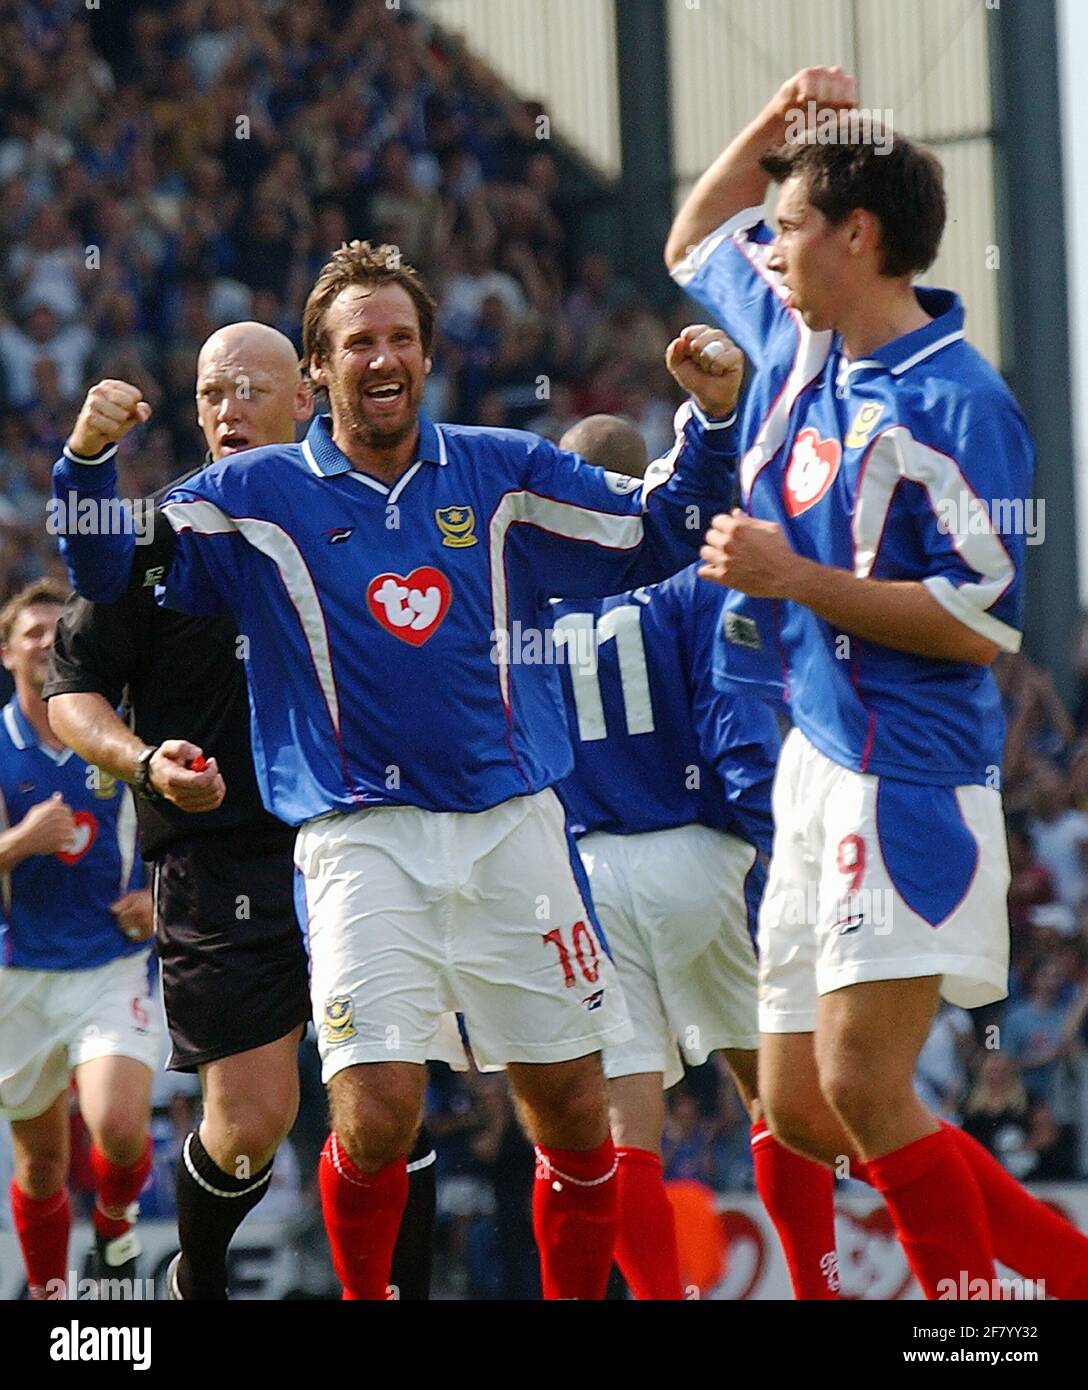 PORTSMOUTH V WATFORD. PAUL MERSON RUSHES TO CONGRATULATE STETOSLAV TODOROV AFTER HE SCORES POMPEY'S SECOND. PIC MIKE WALKER, 2002  PI Stock Photo